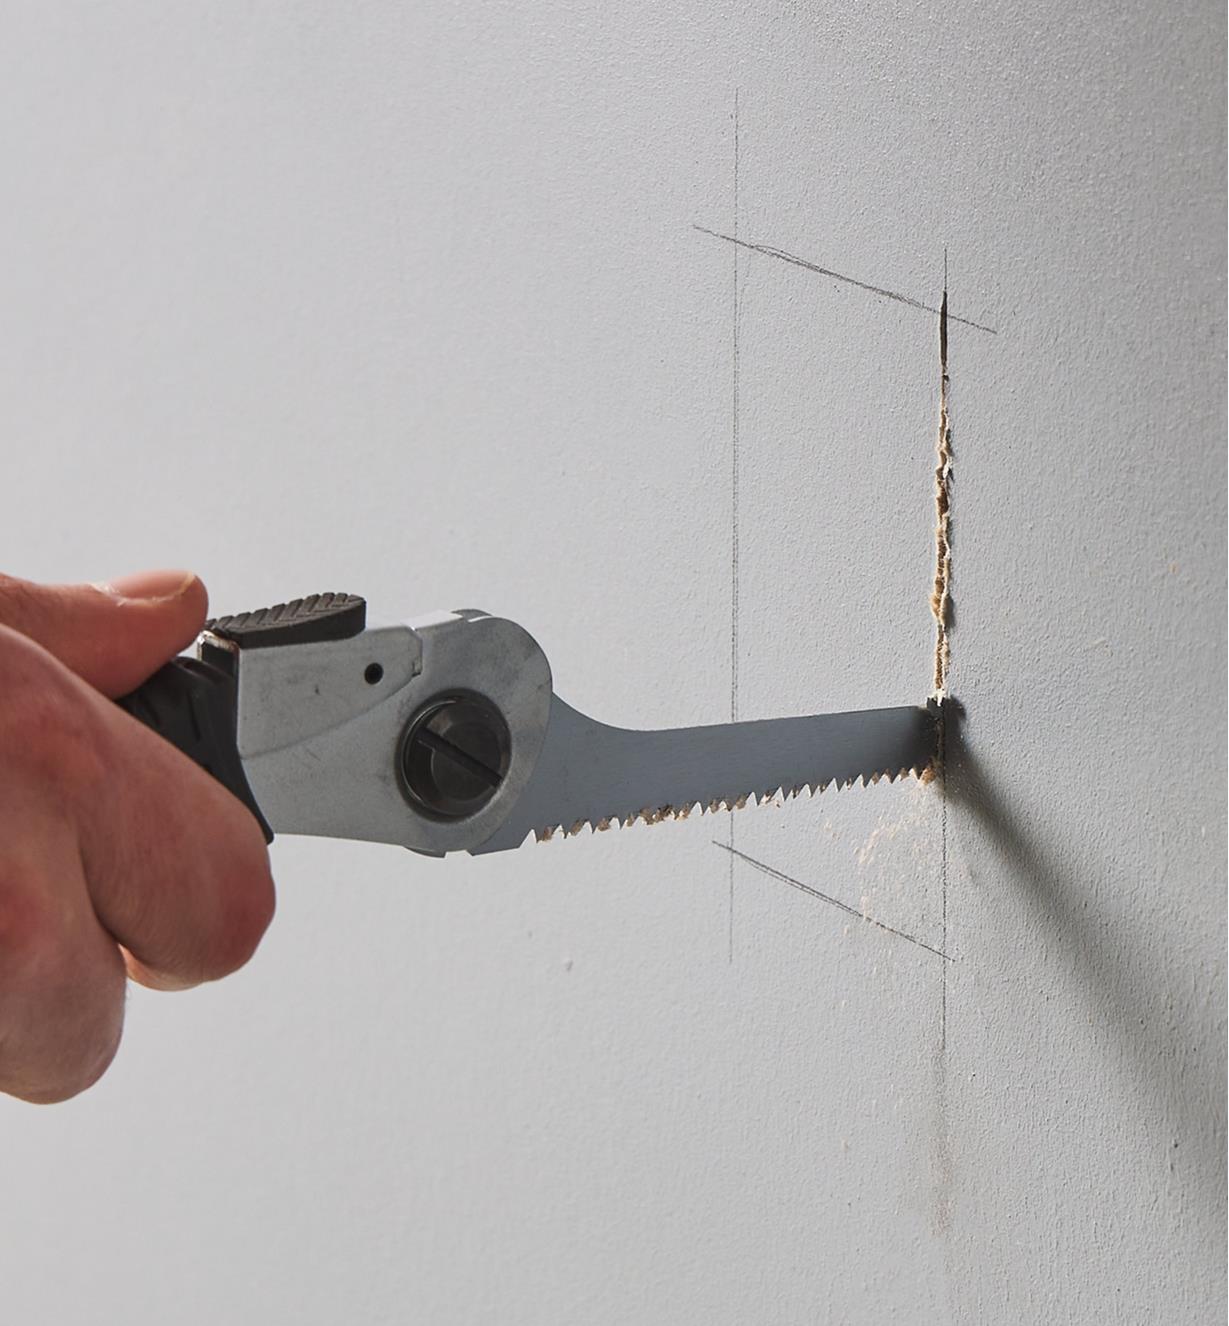 Using the folding pocket saw with the 10 tpi keyhole blade to cut a hole in a piece of drywall